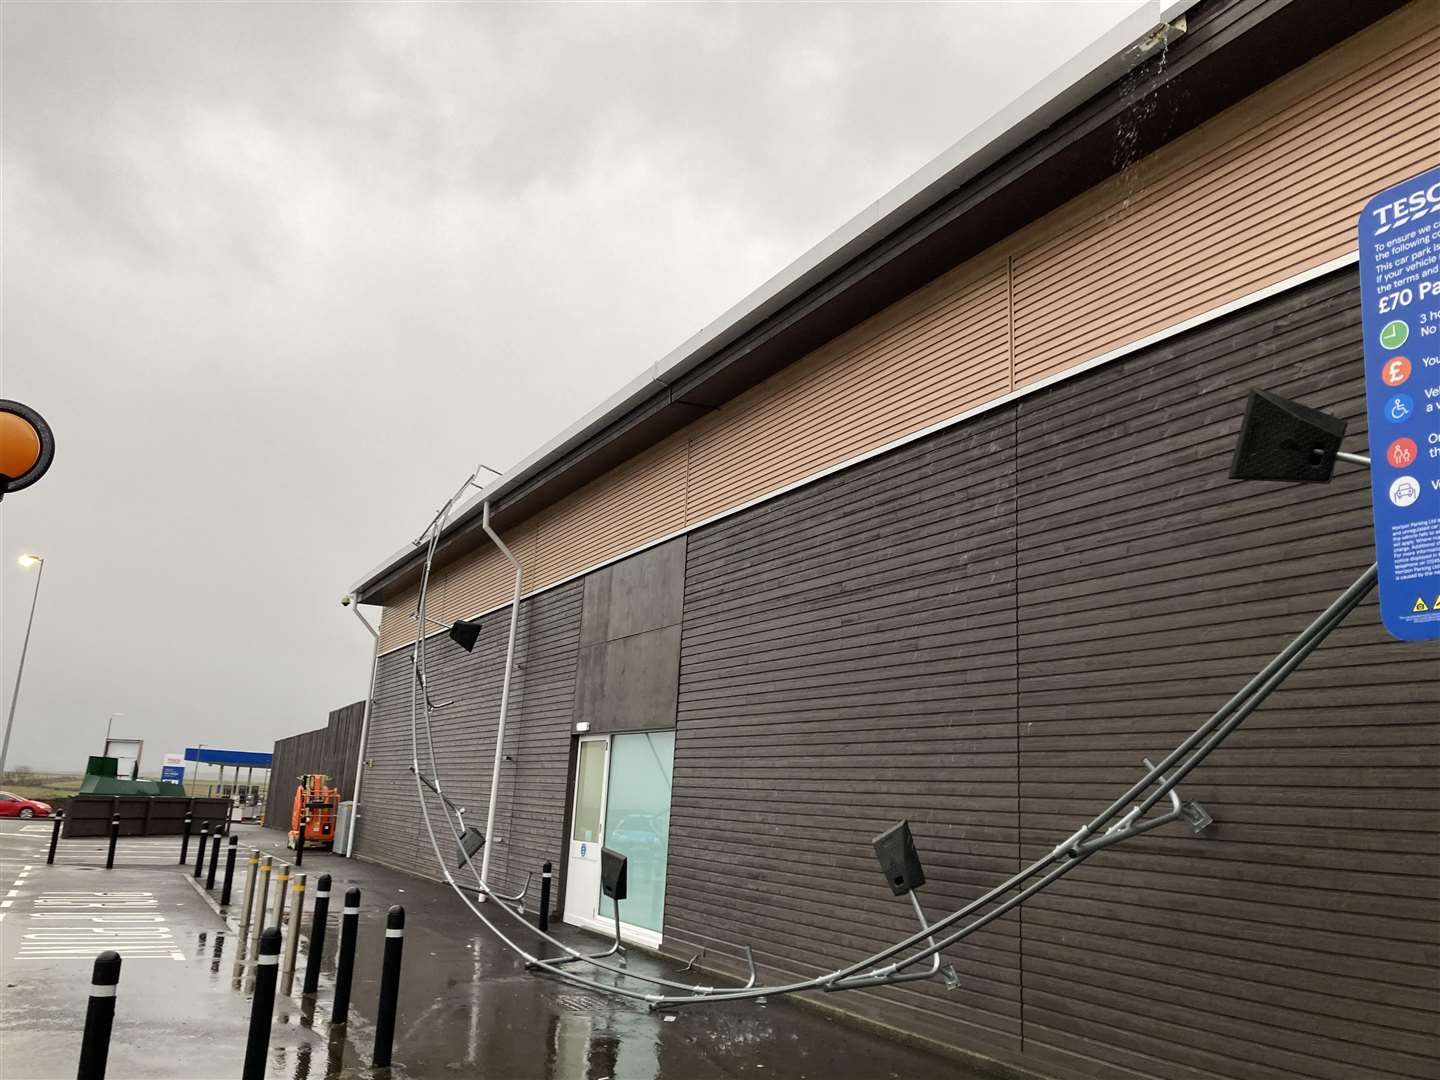 Friday's storm caused a railing on the roof at the Wick Tesco store to blow down. Picture: Richard Macleod